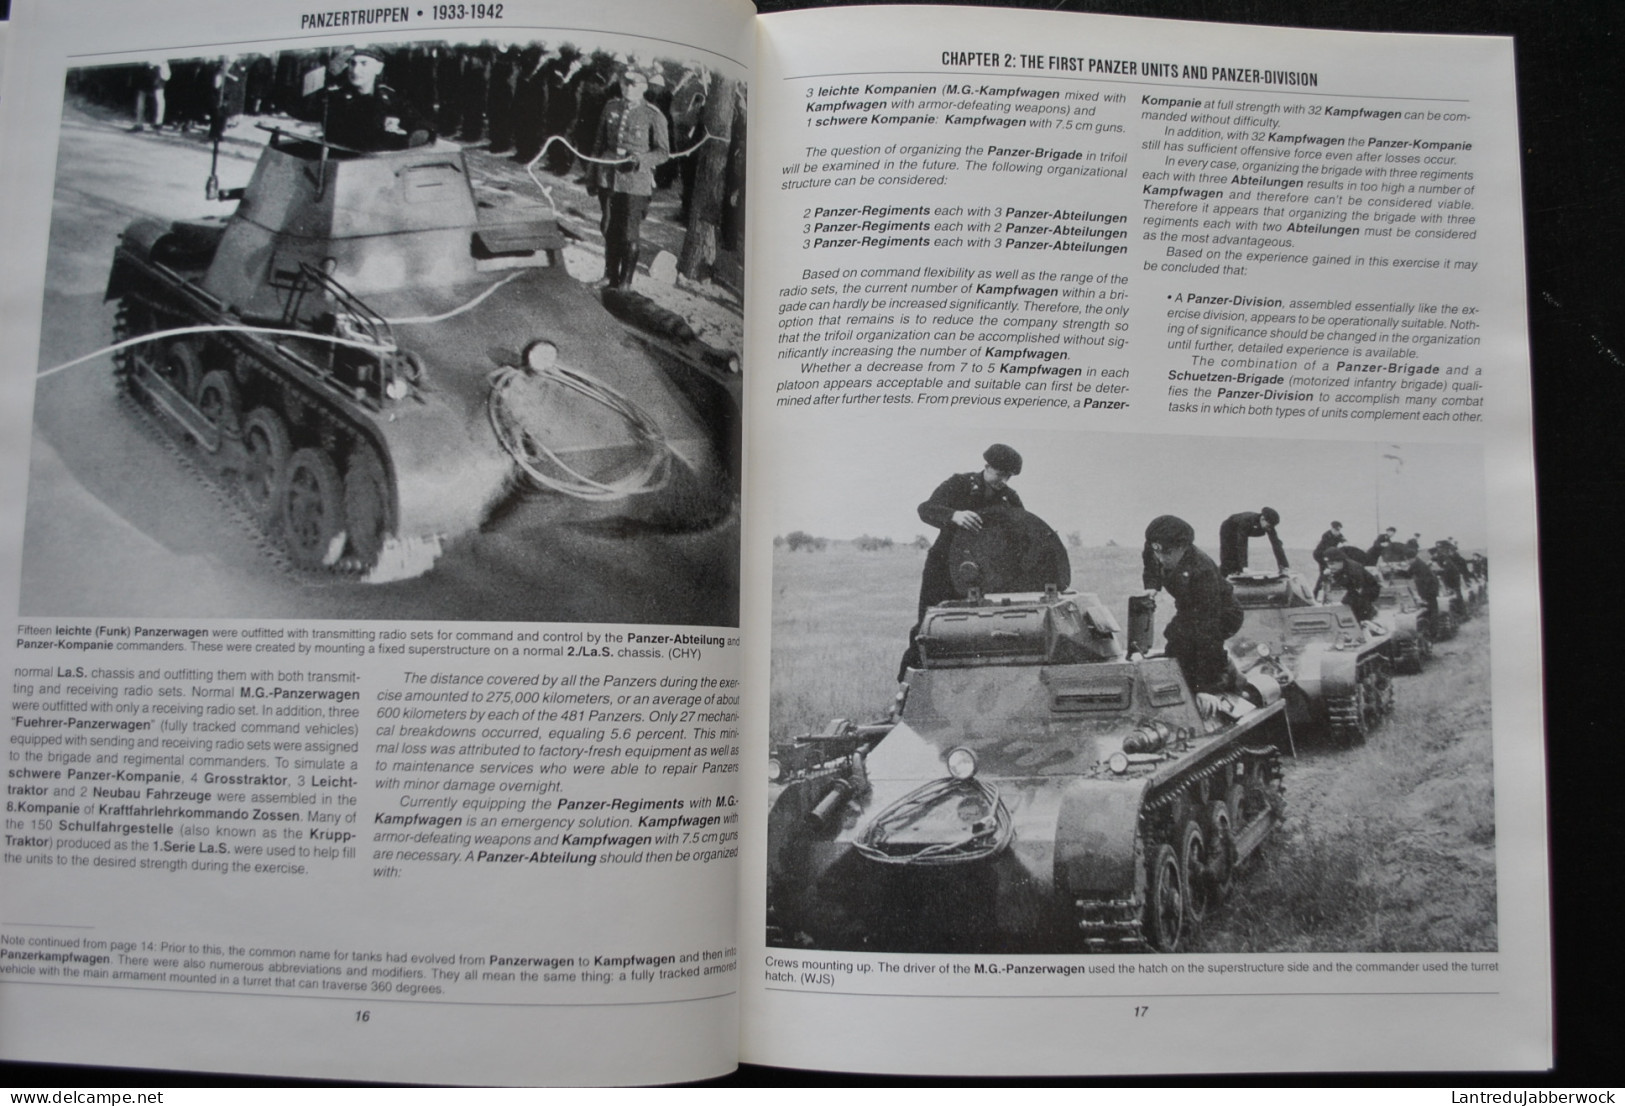 PANZER TRUPPEN VOL. 1 THE COMPLETE GUIDE TO THE CREATION & COMBAT EMPLOYMENT OF GERMANY'S TANK FORCE 1933-1942 RARE - Fahrzeuge